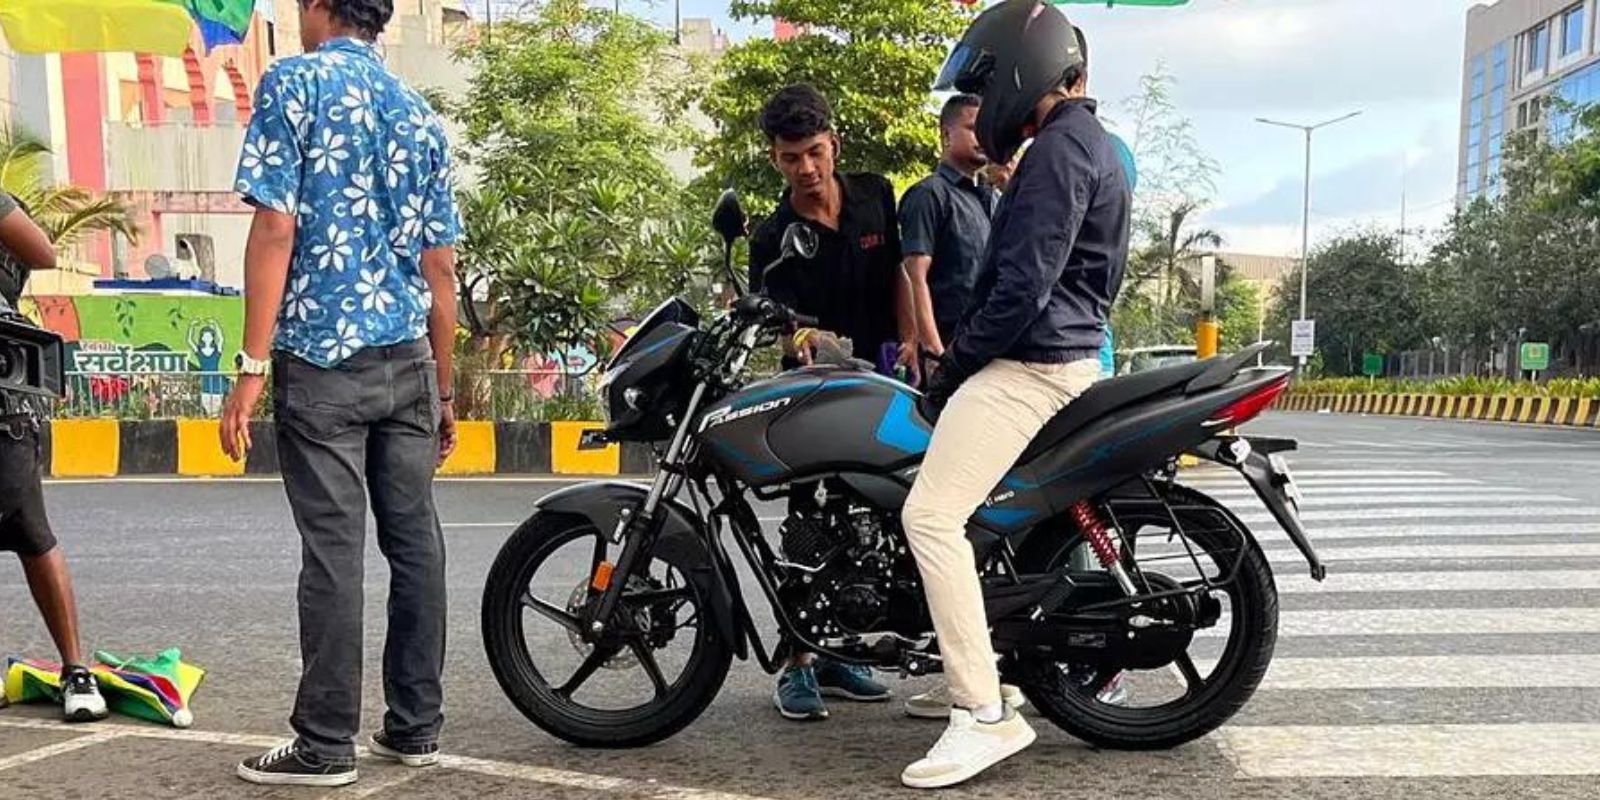 2023 Hero Passion XPro Spotted Ahead of Official Launch in India - image